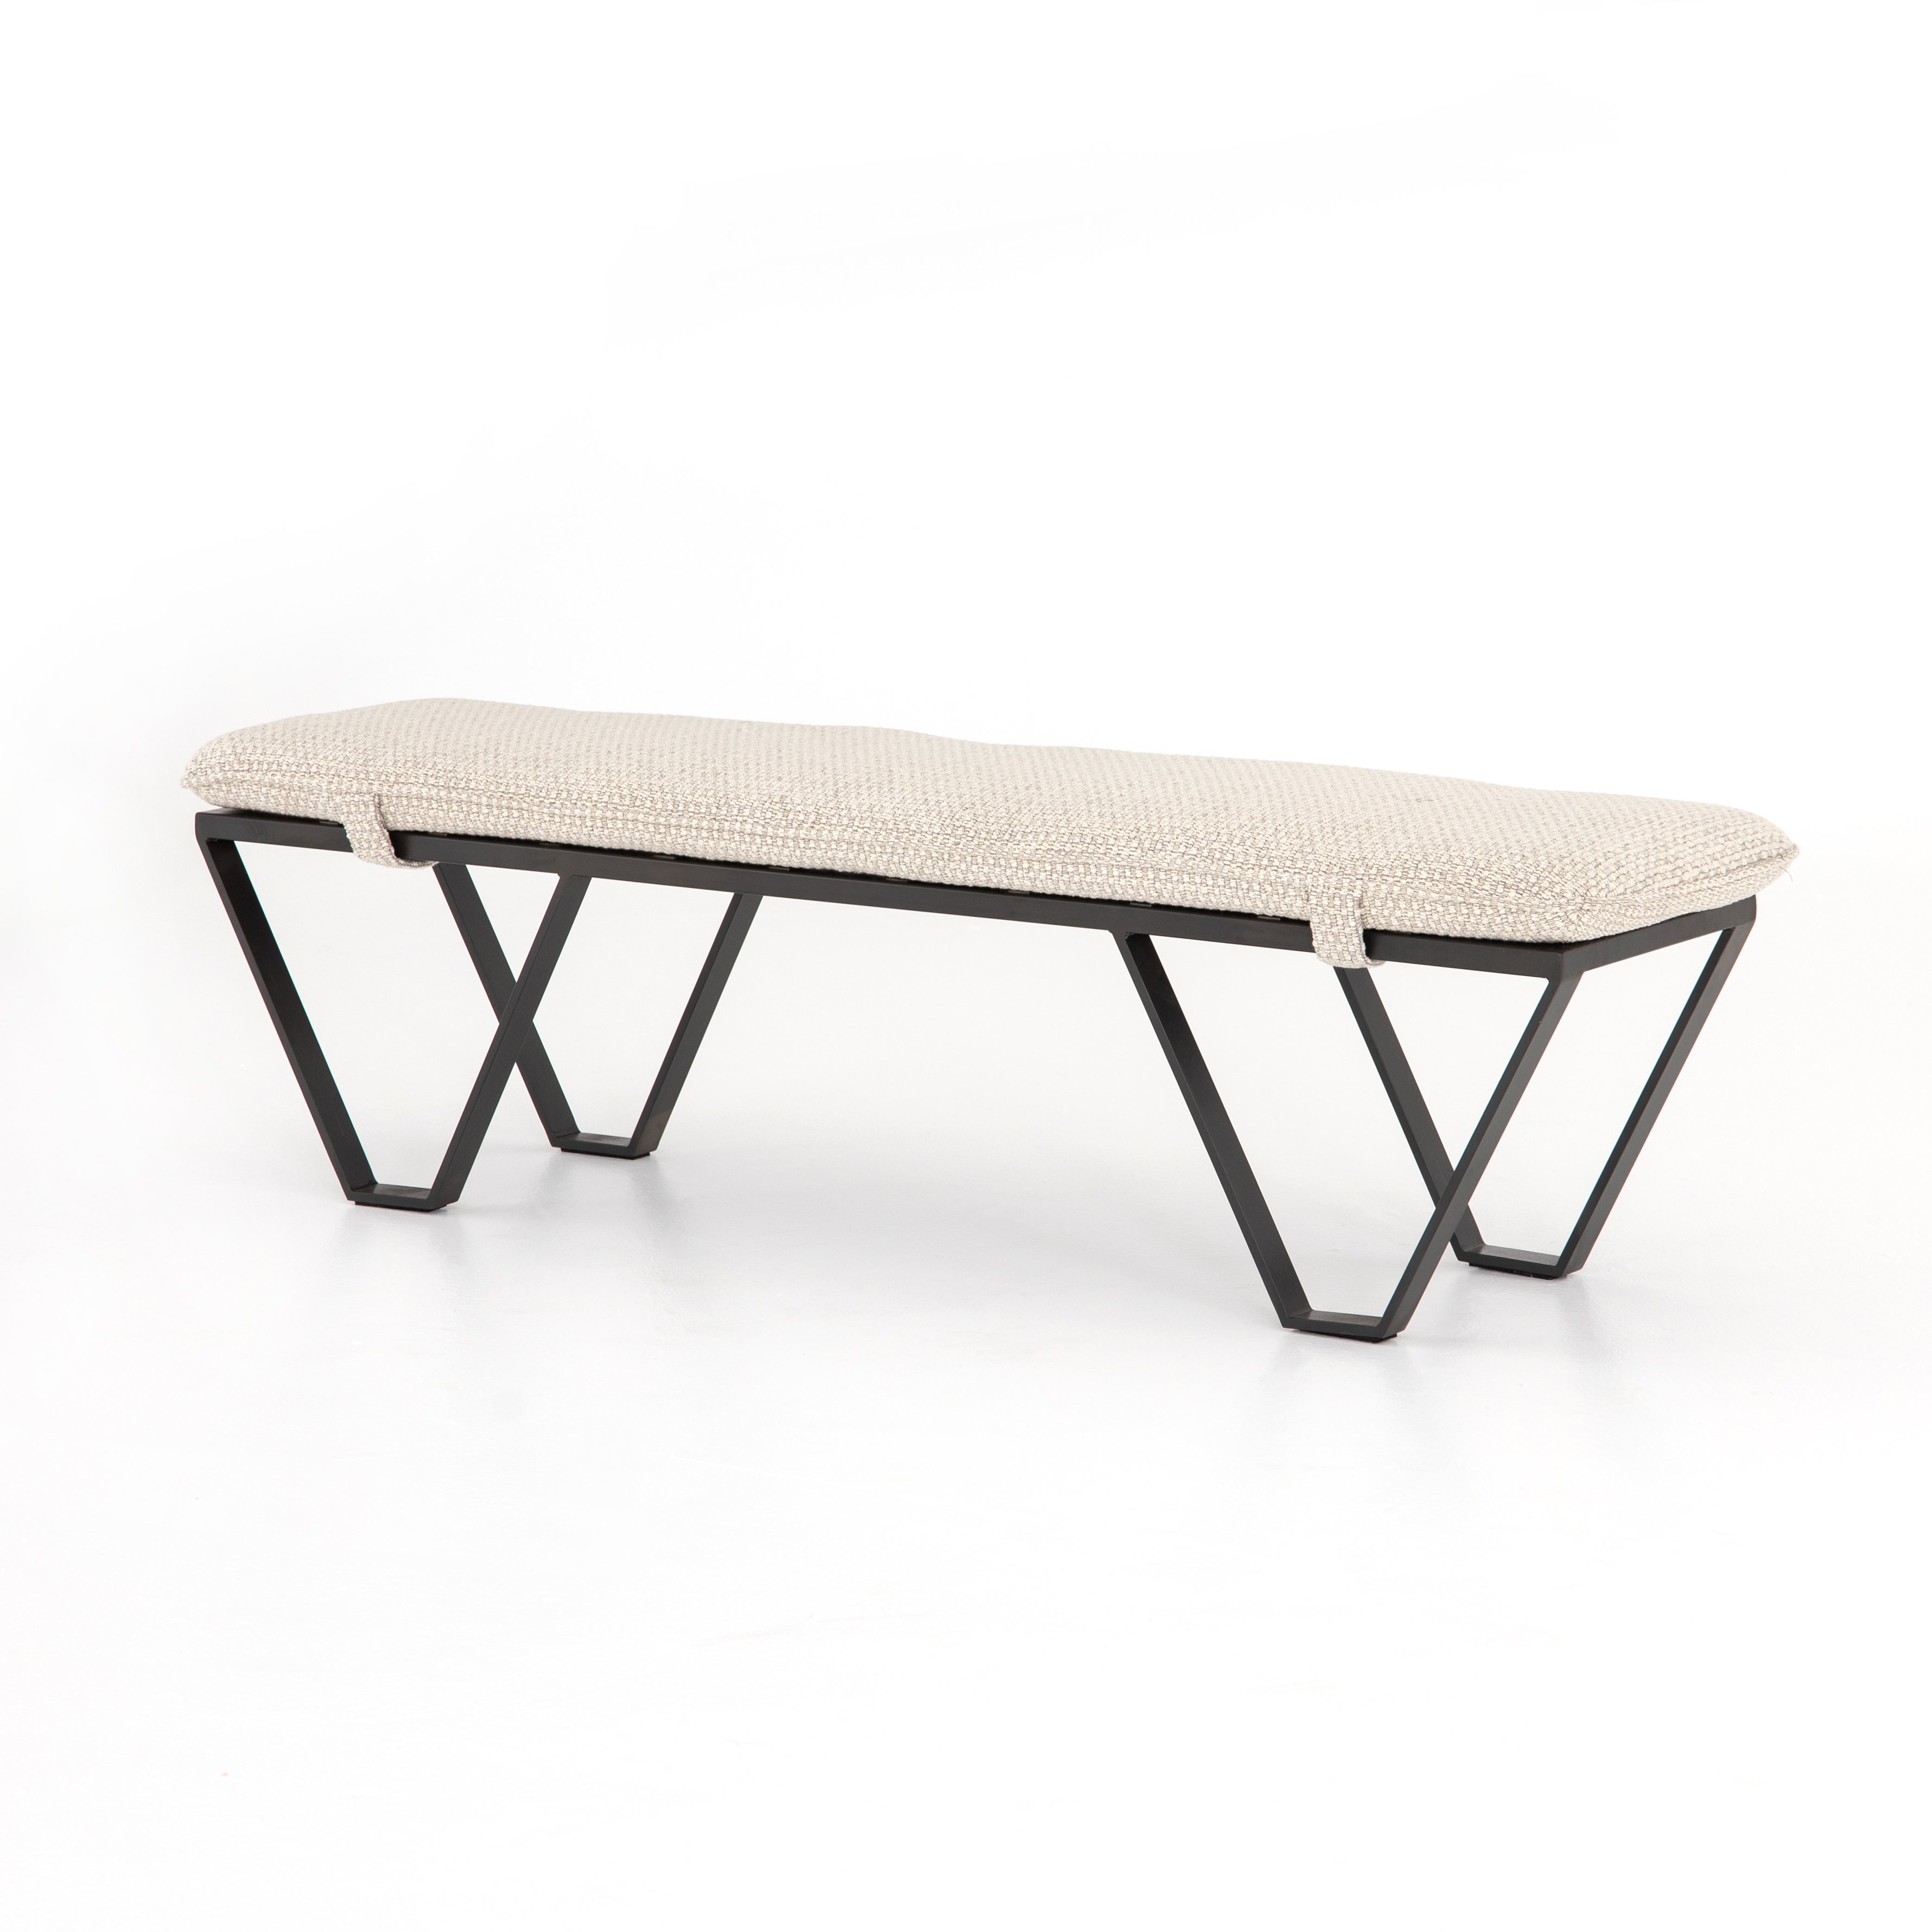 modern industrial padded cream fabric bench with metal base$899.00